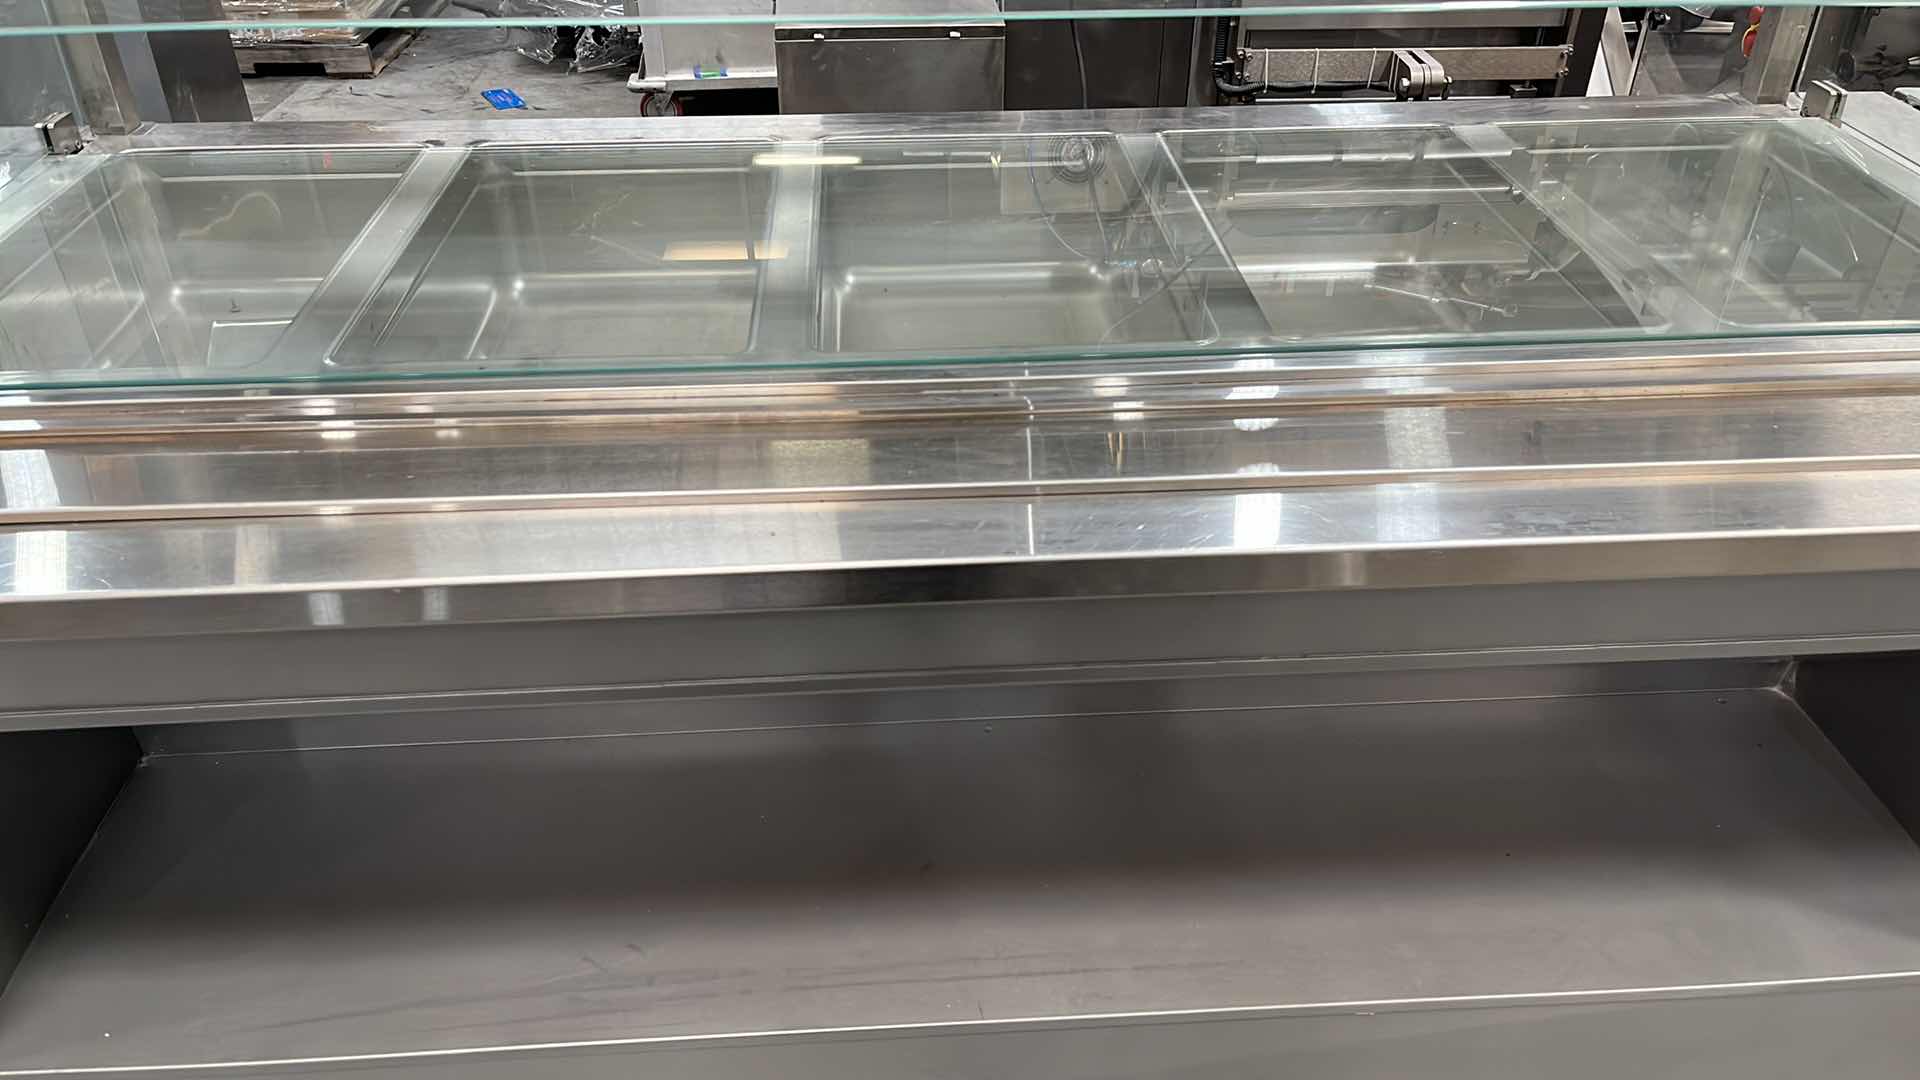 Photo 3 of HUSSMANN COMMERCIAL SELF-SERVICE FOOD COUNTER W HOT WELLS (MODEL IM-05-I7-FH)